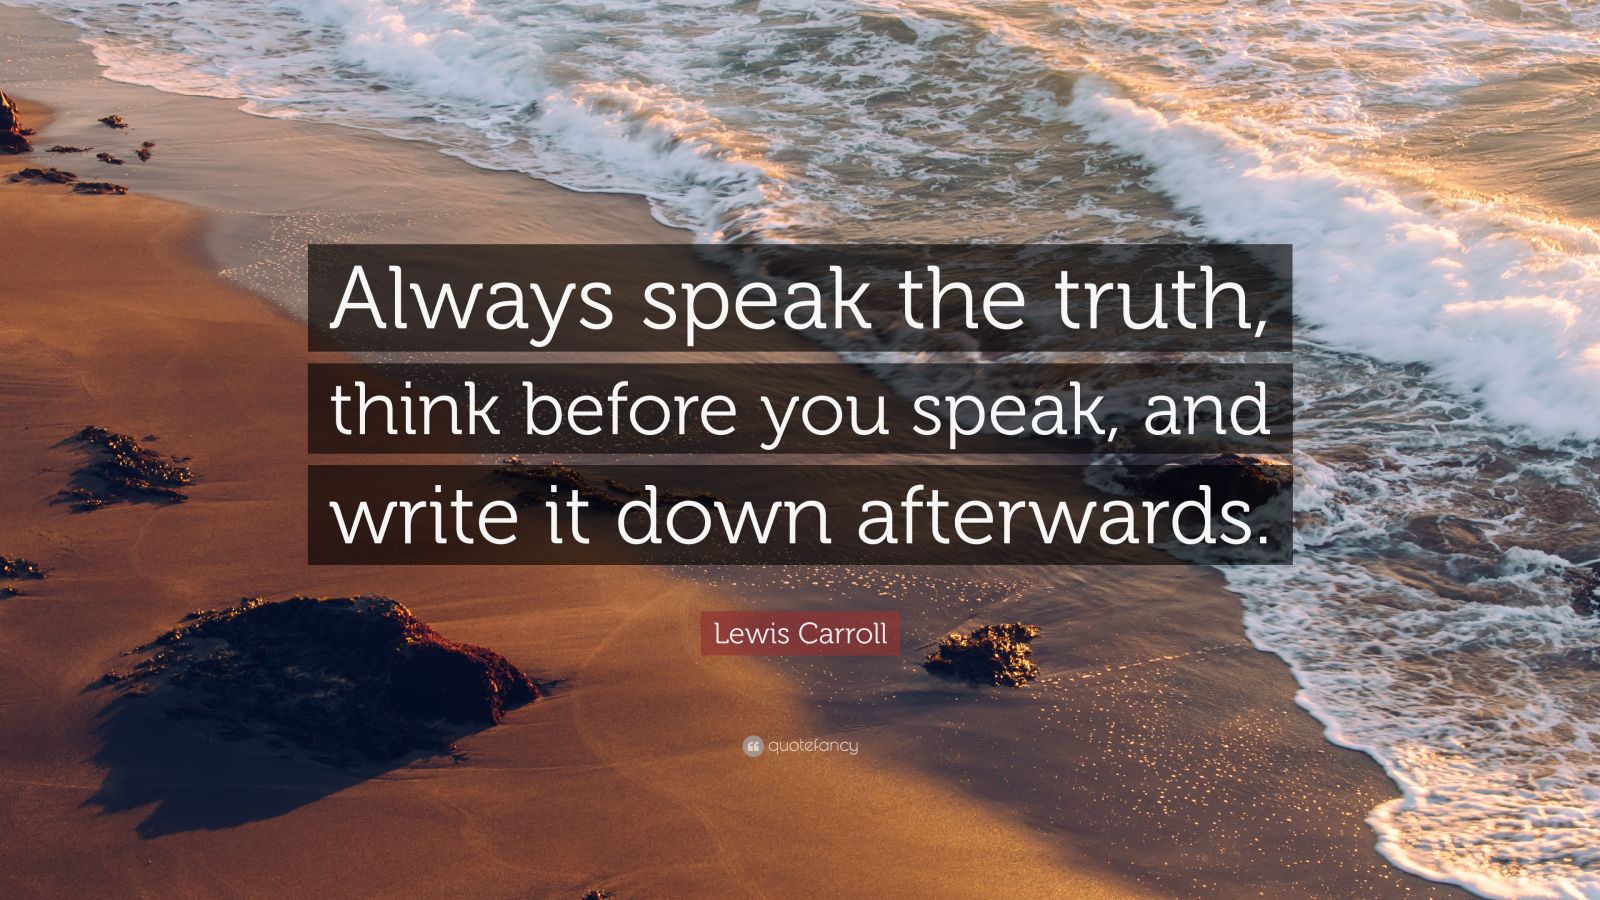 Lewis Carroll Quote “Always speak the truth, think before you speak